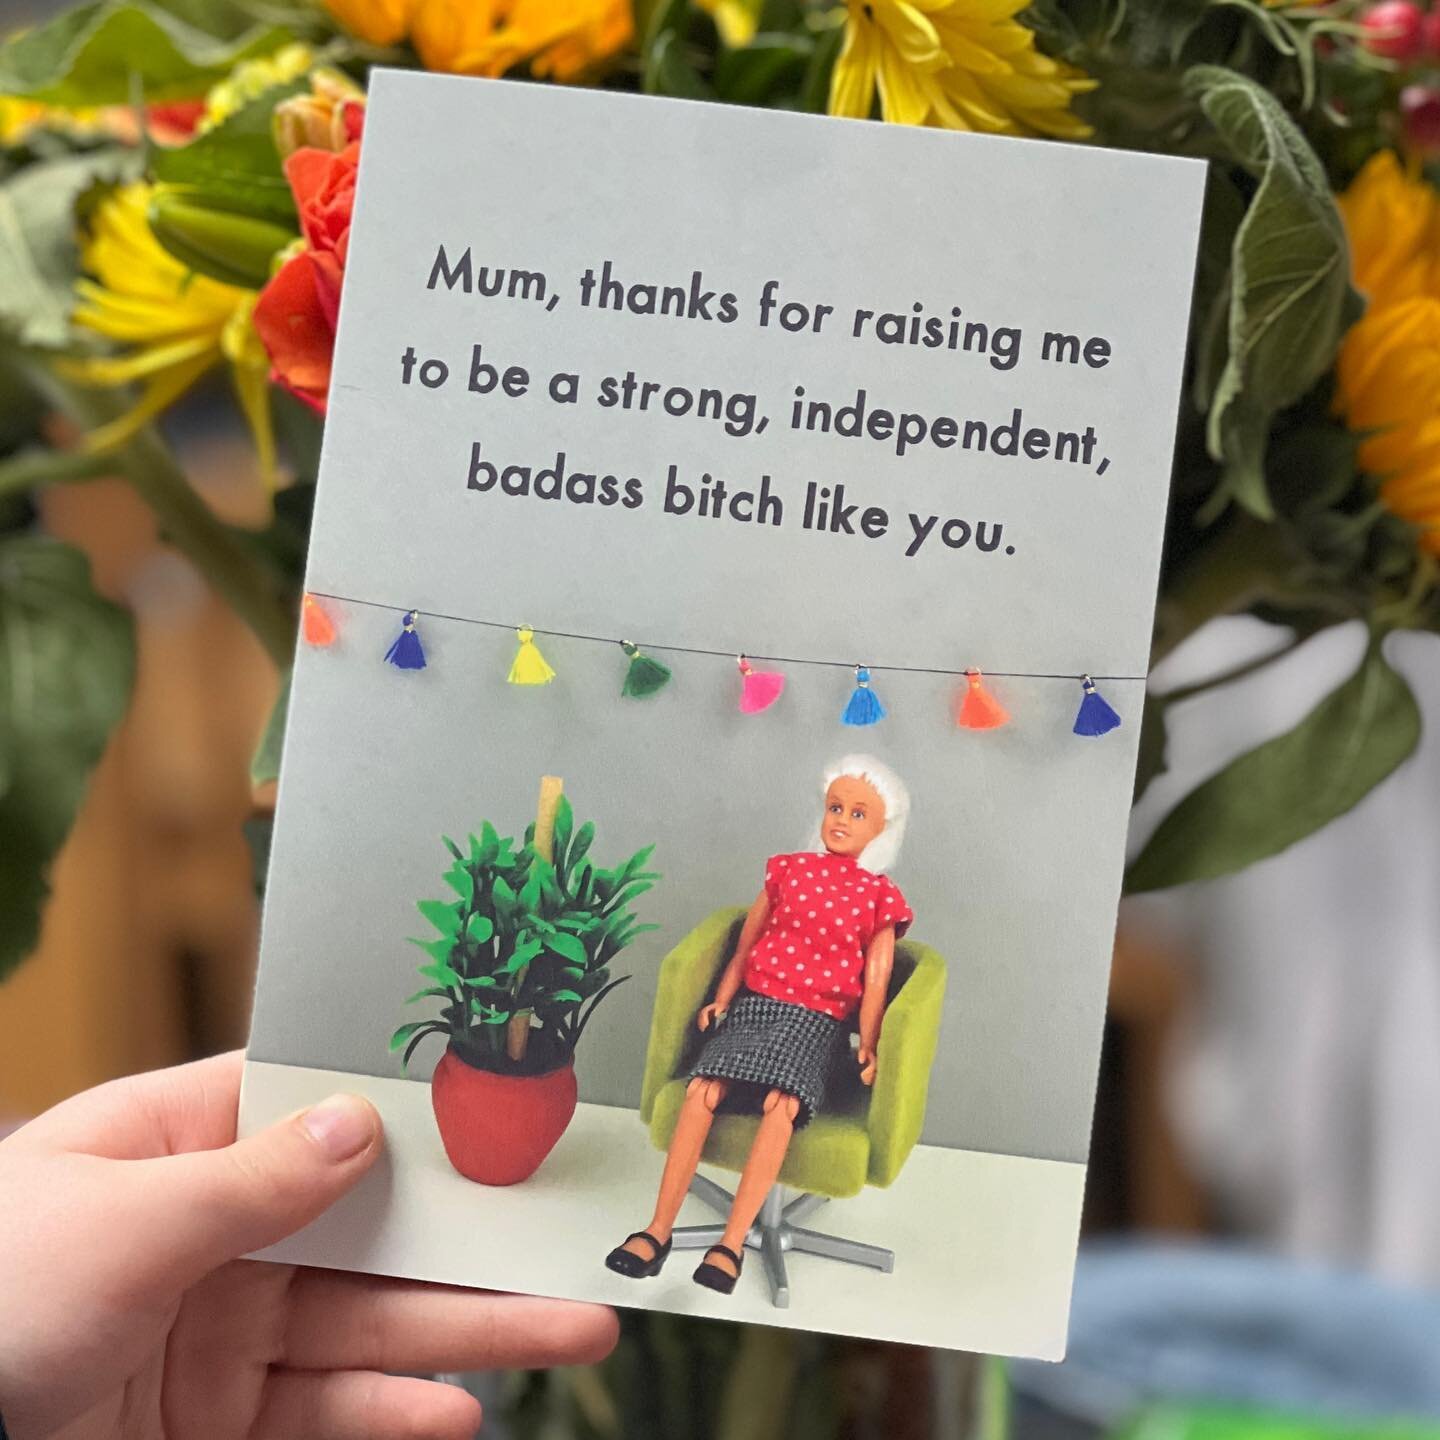 Happy Mother&rsquo;s Day!
I love this card from my daughter 🥰
To my wonderful mum, to all the mums, step mums, grand mums, mum like figures, and anyone who is a mum type of inspiration in your life. Have a great day!
Especially thinking of all the m